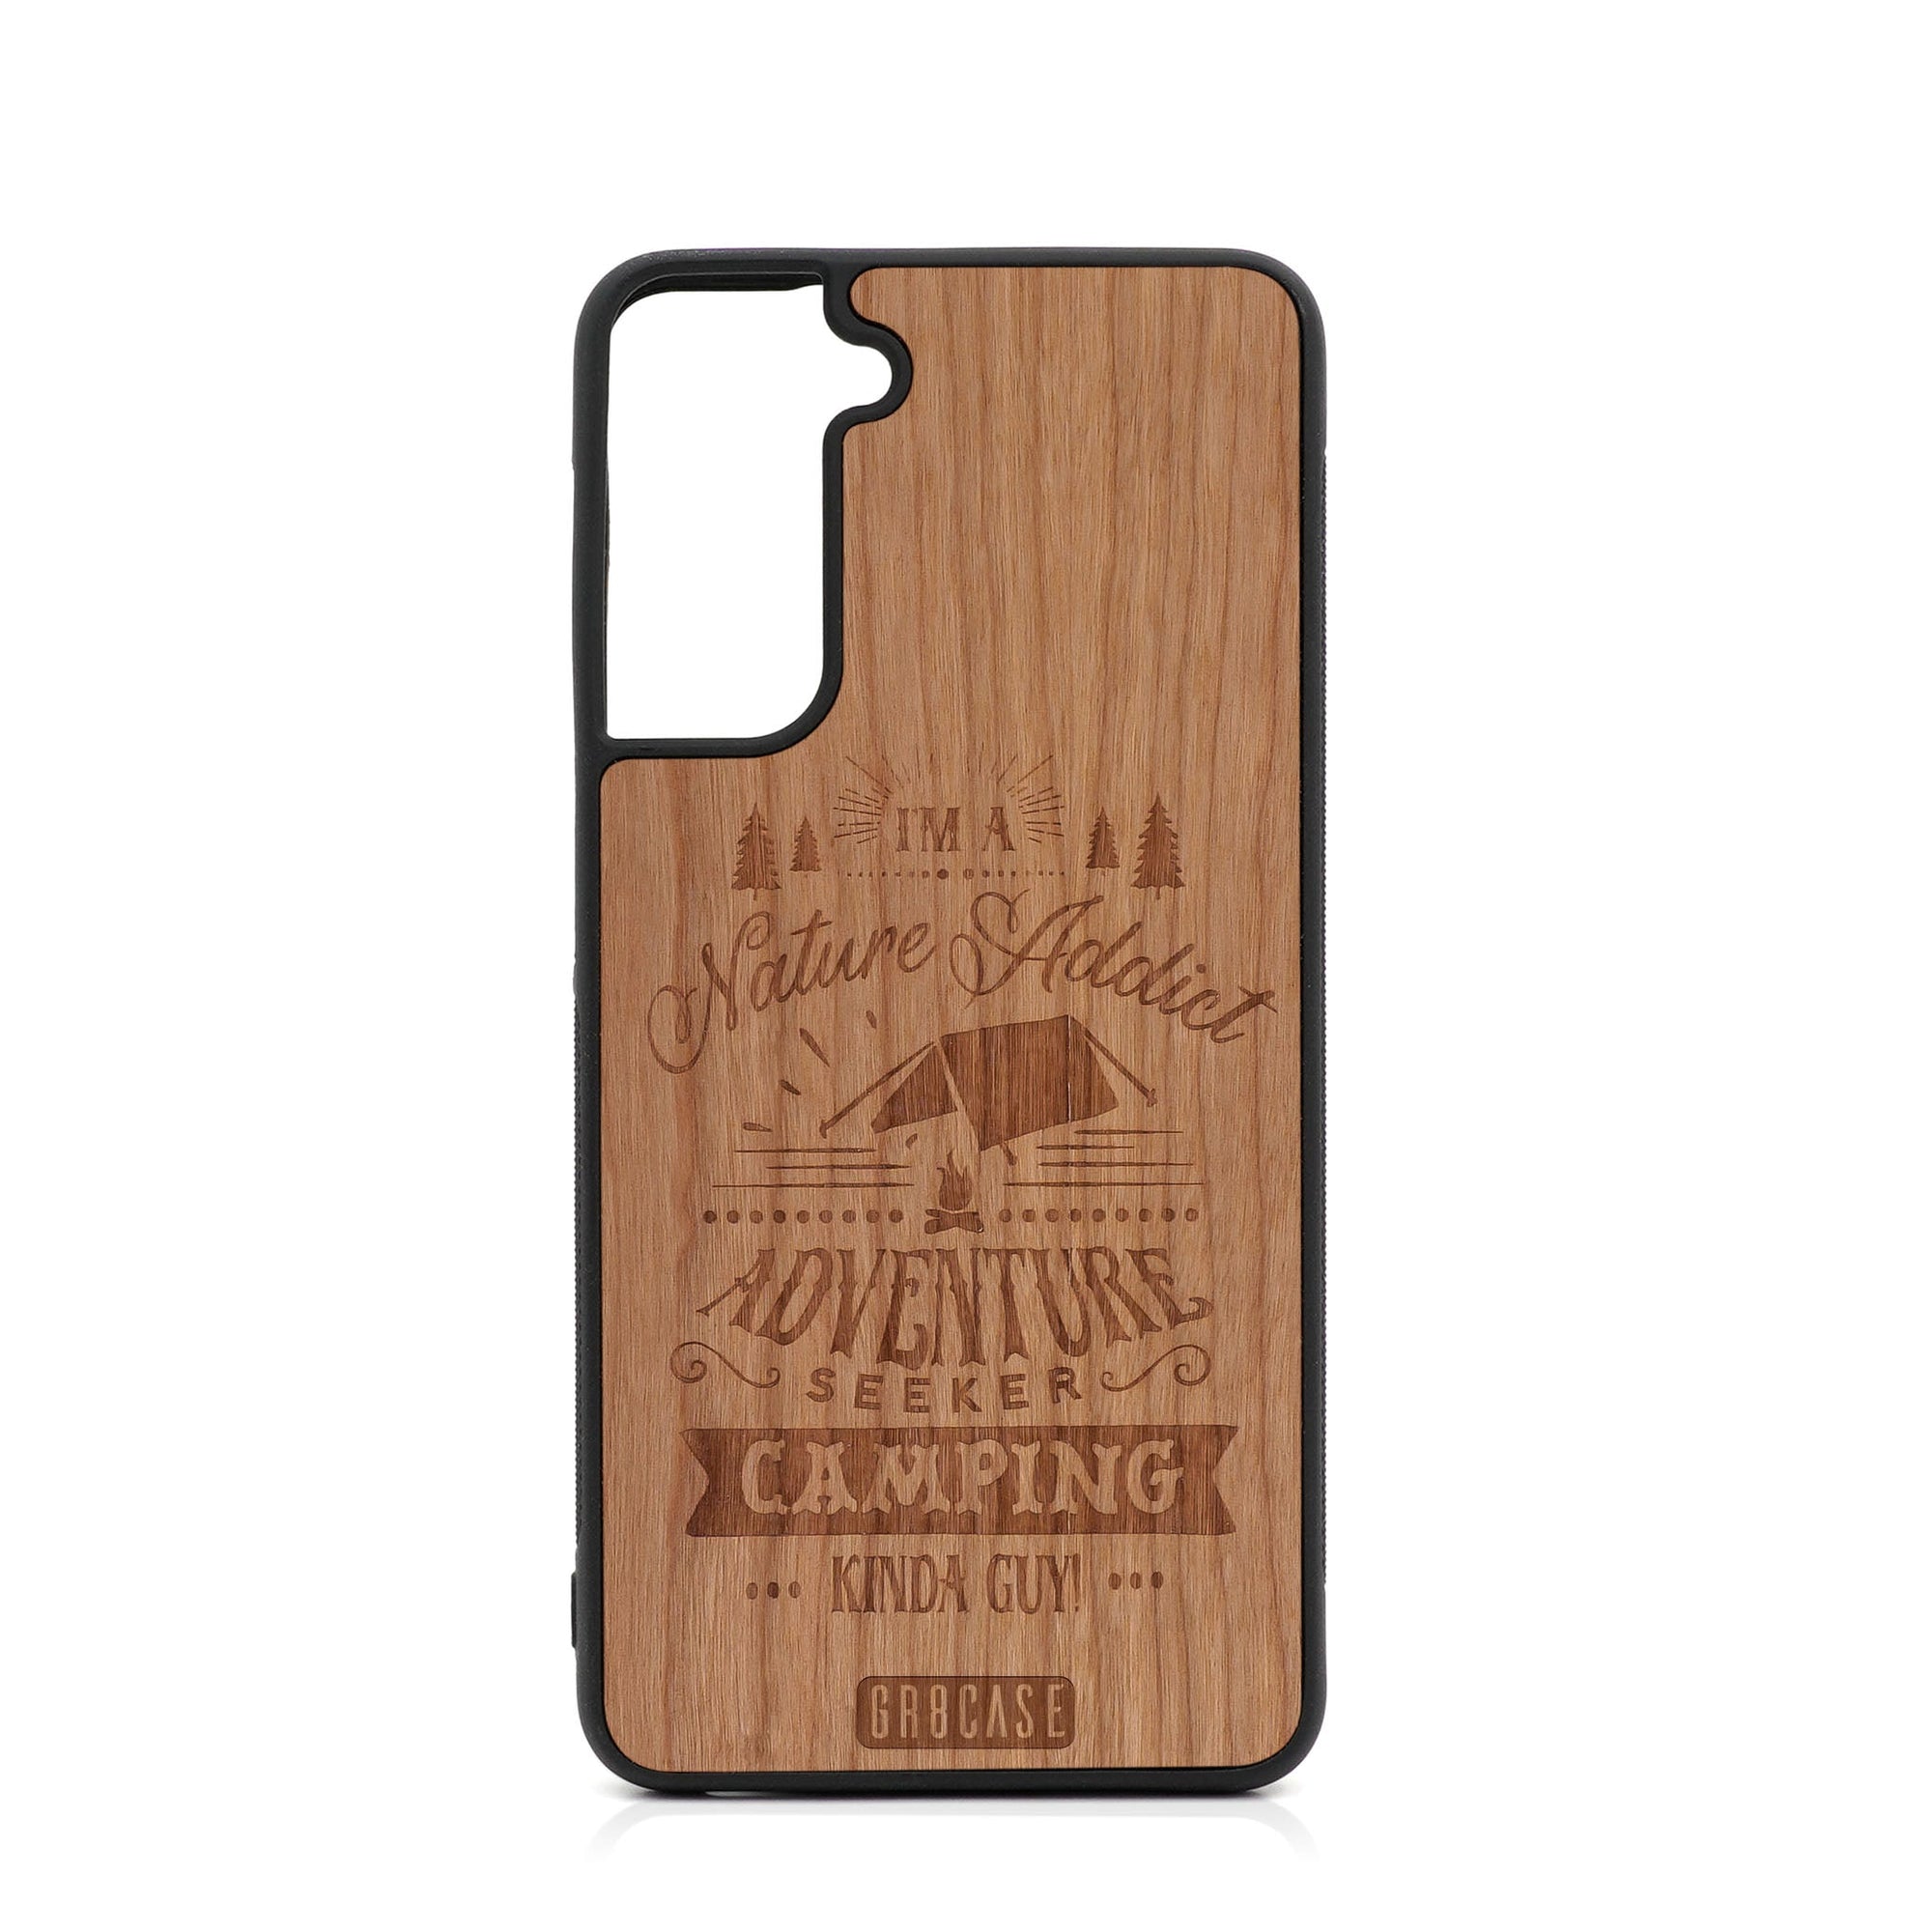 I'm A Nature Addict Adventure Seeker Camping Kinda Guy Design Wood Case For Samsung Galaxy S22 Plus